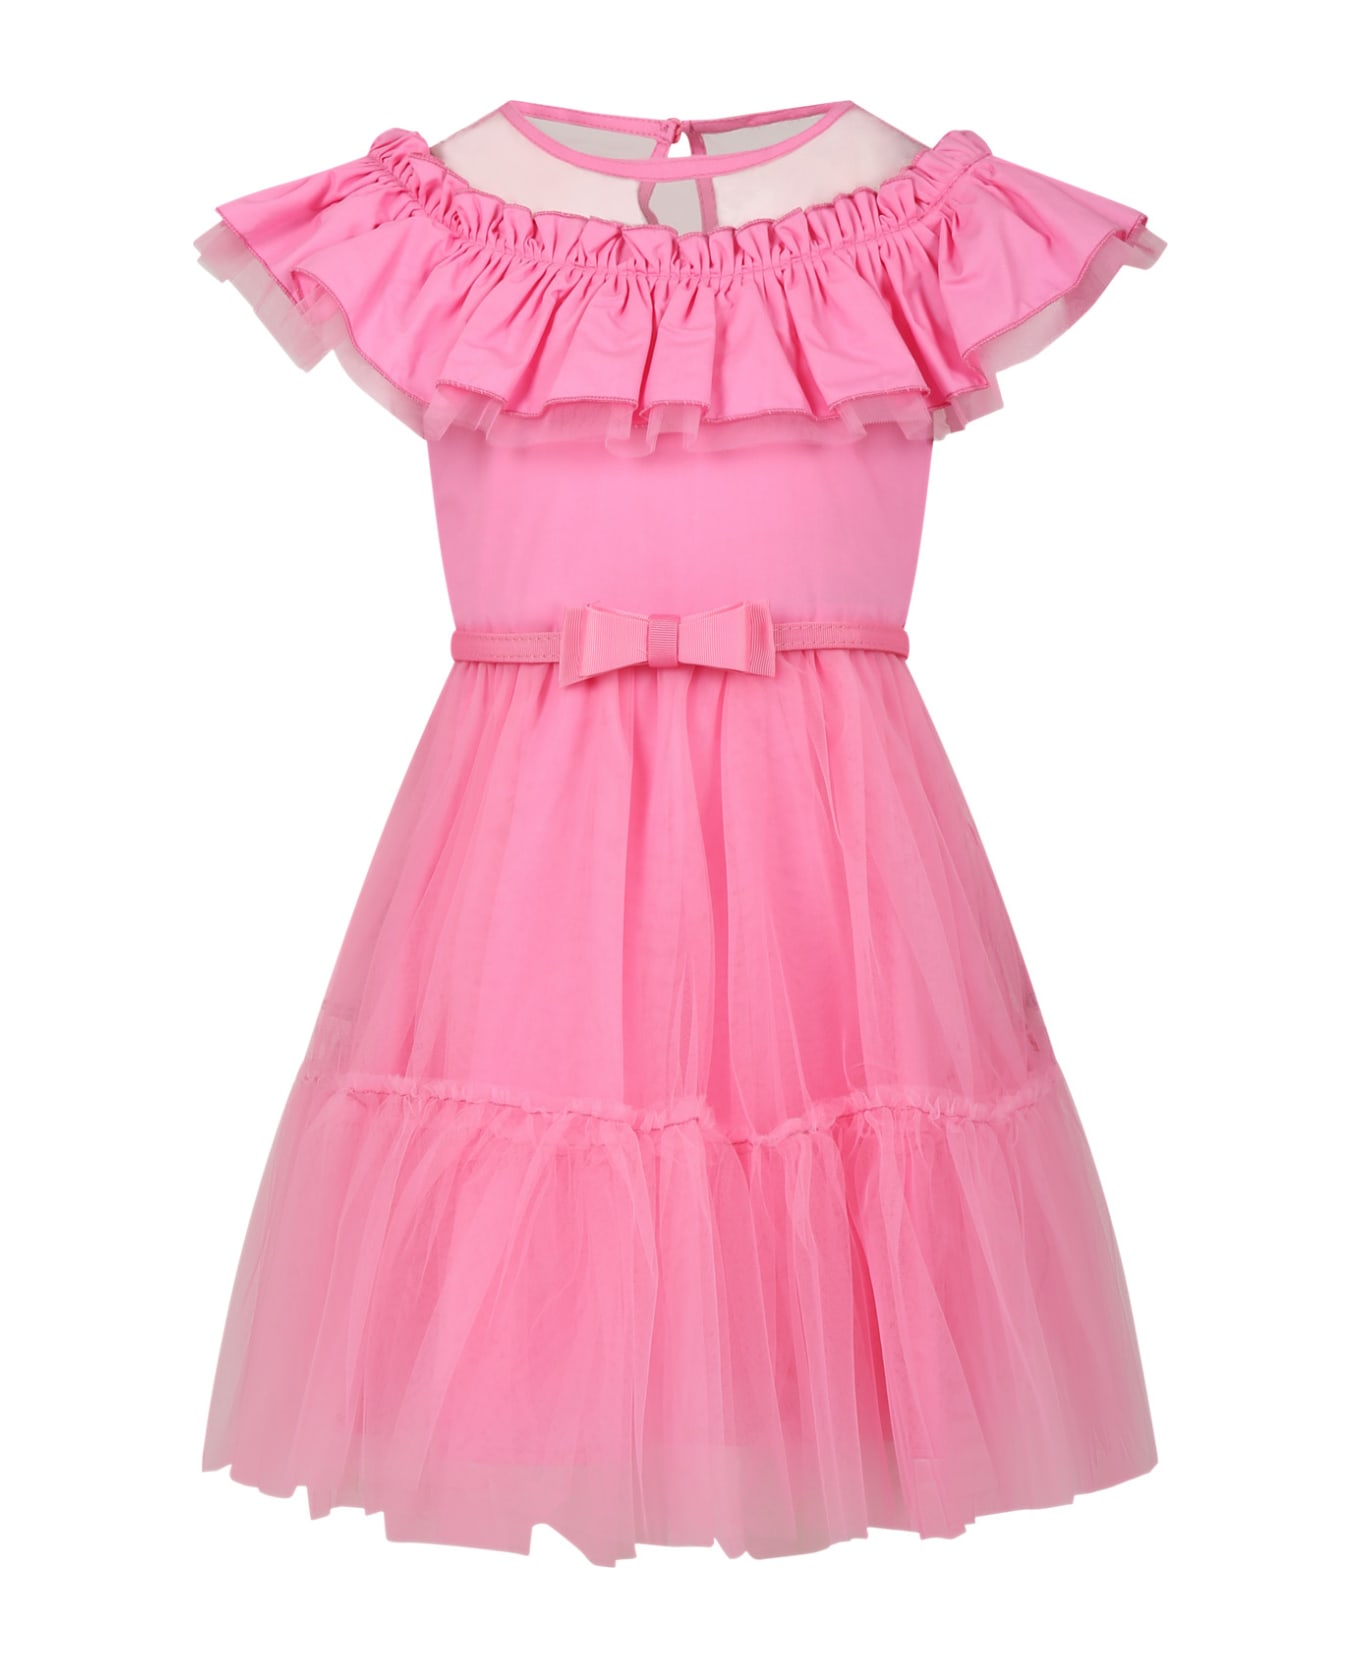 Monnalisa Pink Dress For Girl With Tulle And Ruffles - Pink